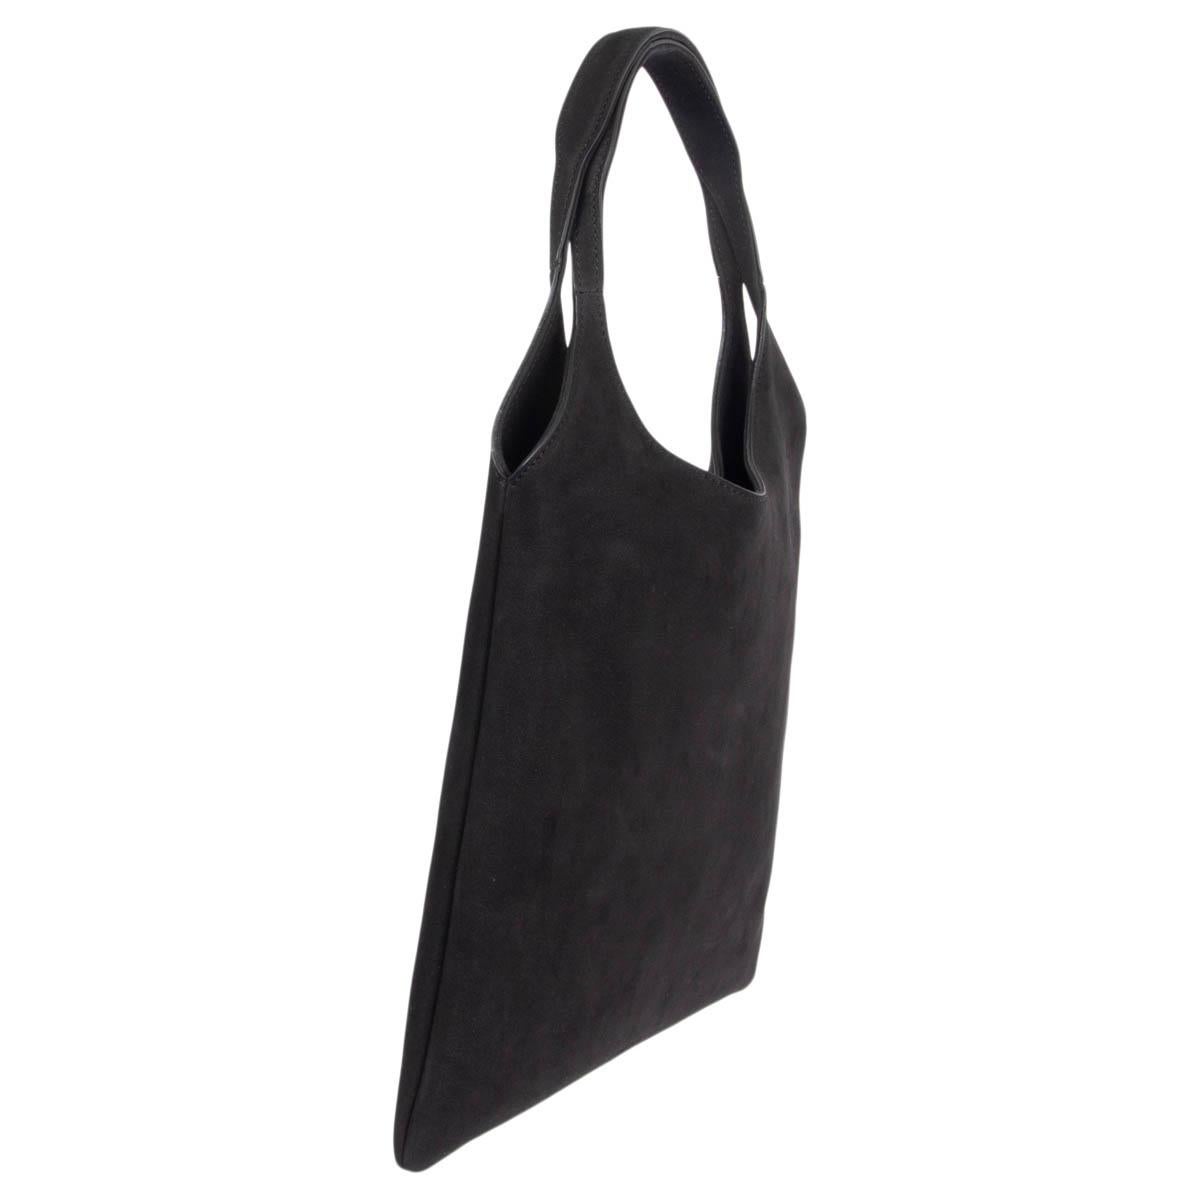 100% authentic The Row Iris mini tote bag in black nubuck suede. Unlined with one flat pocket against the back. Has been carried and is in excellent condition. 

Measurements
Height	21.5cm (8.4in)
Width	24cm (9.4in)
Depth	2cm (0.8in)
Drop of the